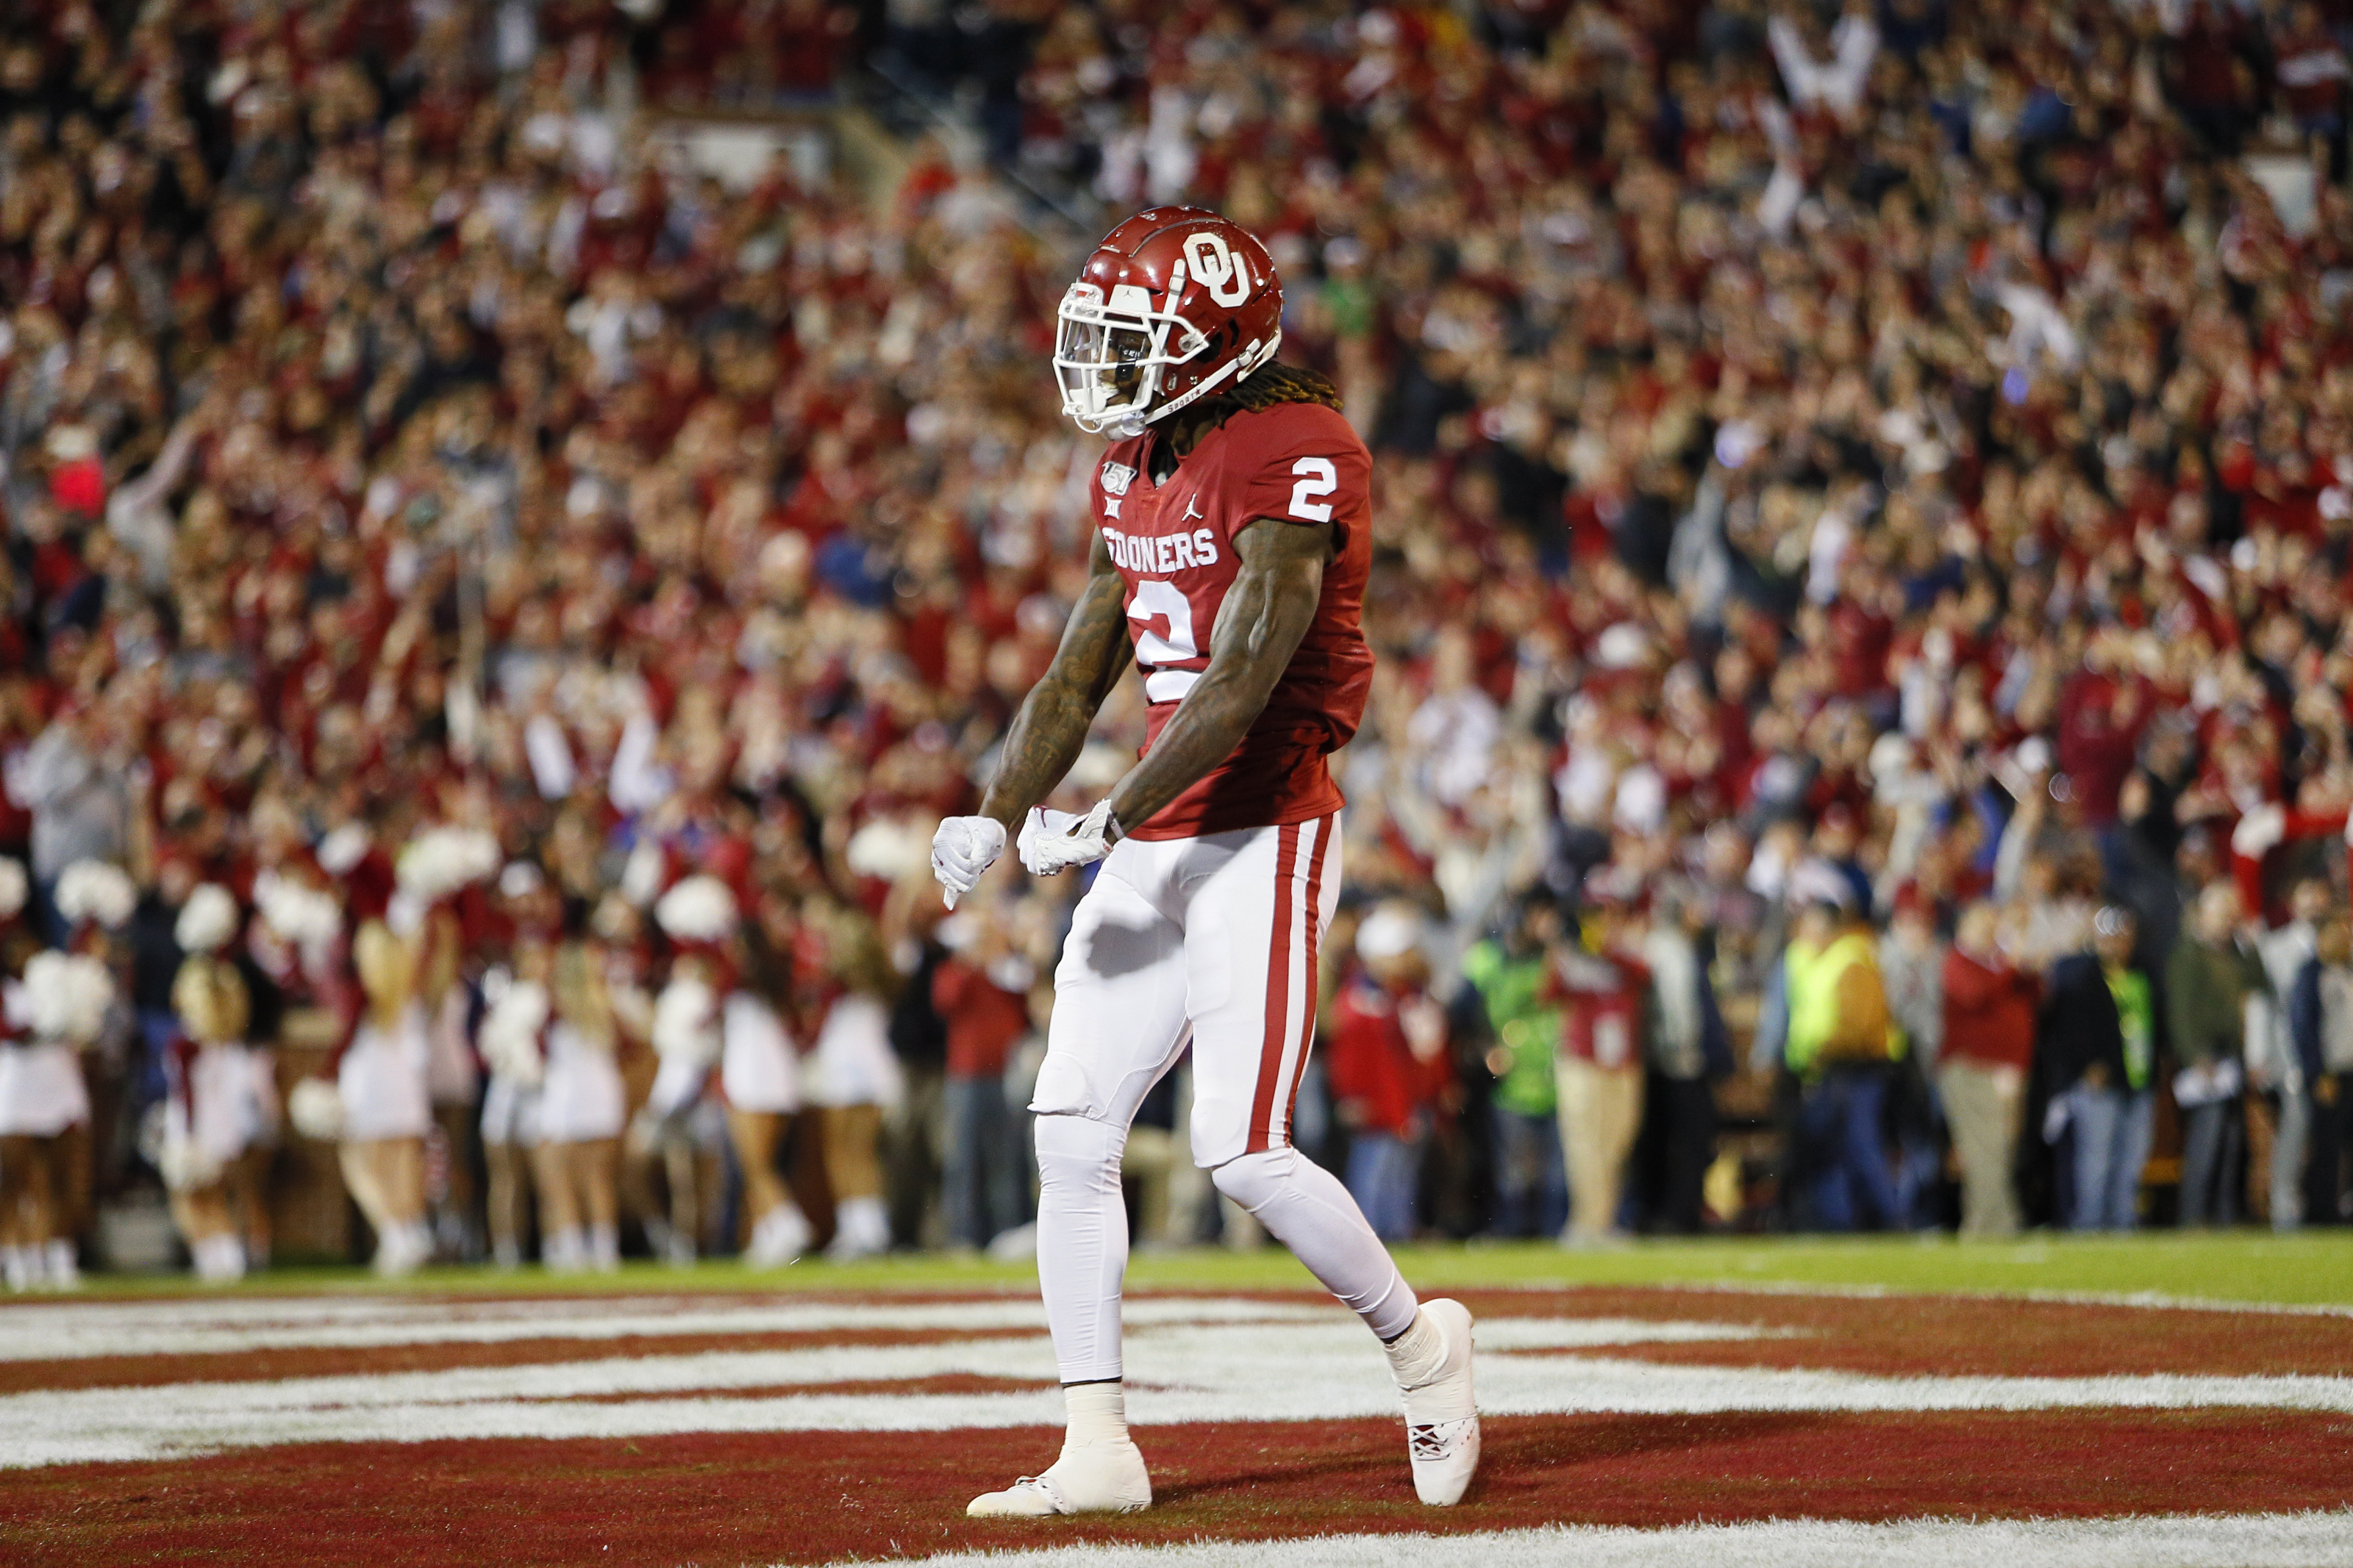 Four Sooners Selected in 2014 NFL Draft - University of Oklahoma